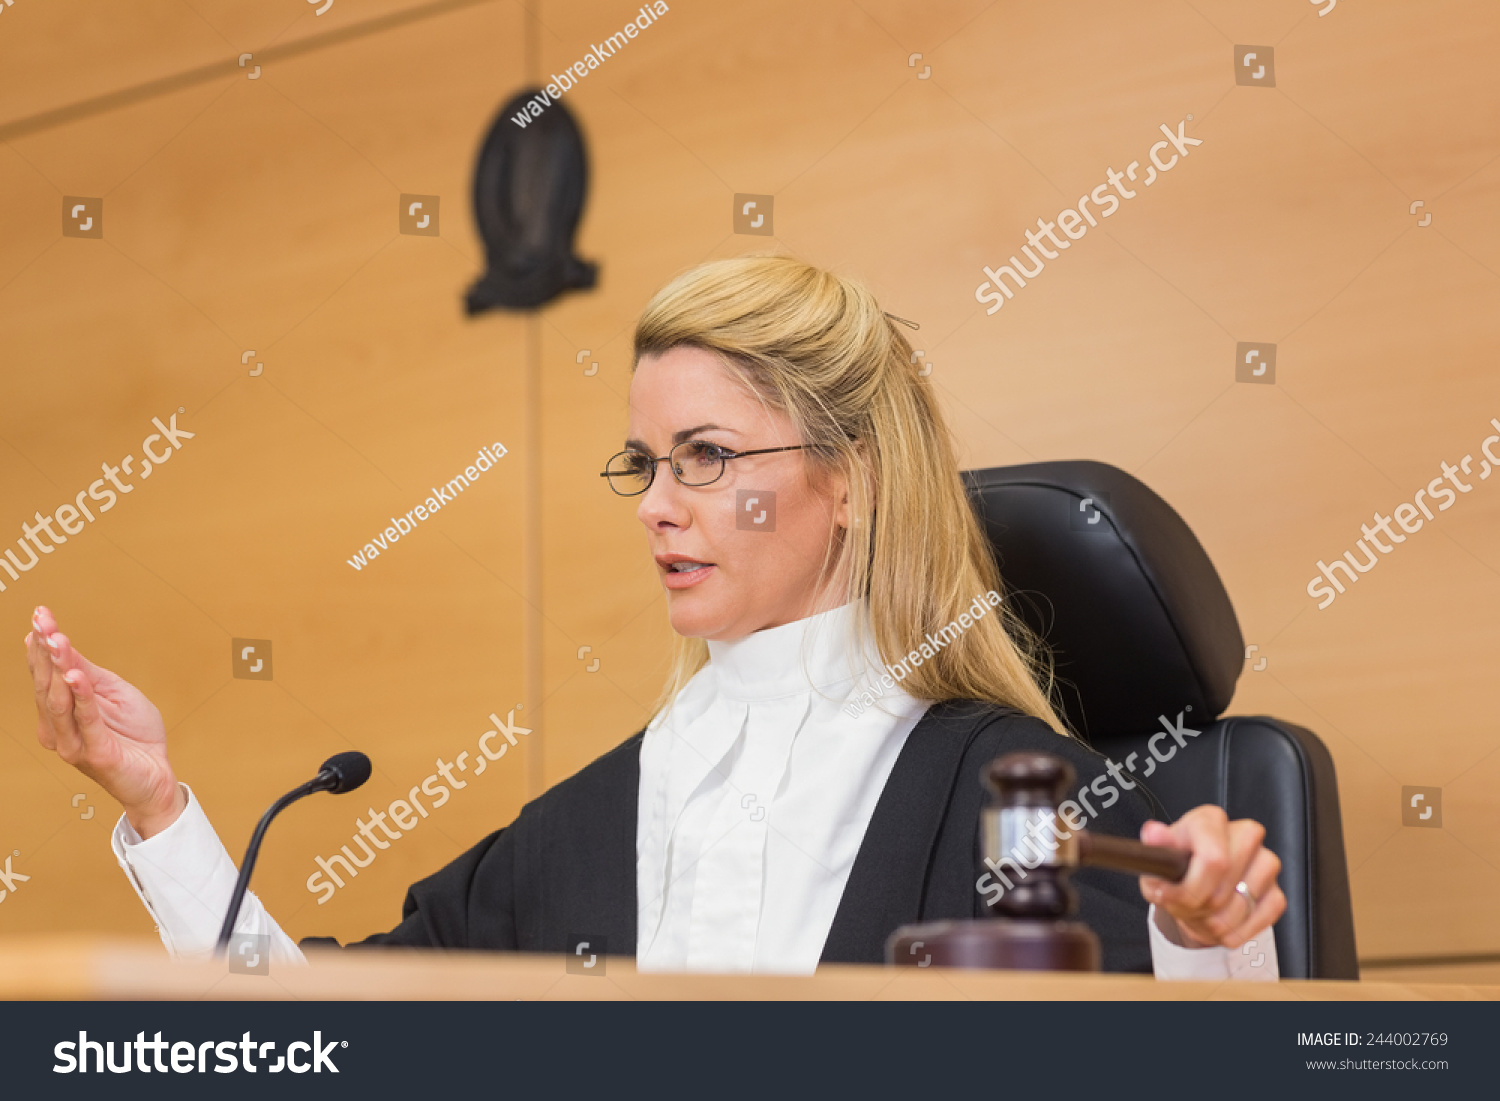 stock-photo-stern-judge-speaking-to-the-court-in-the-court-room-244002769.jpg